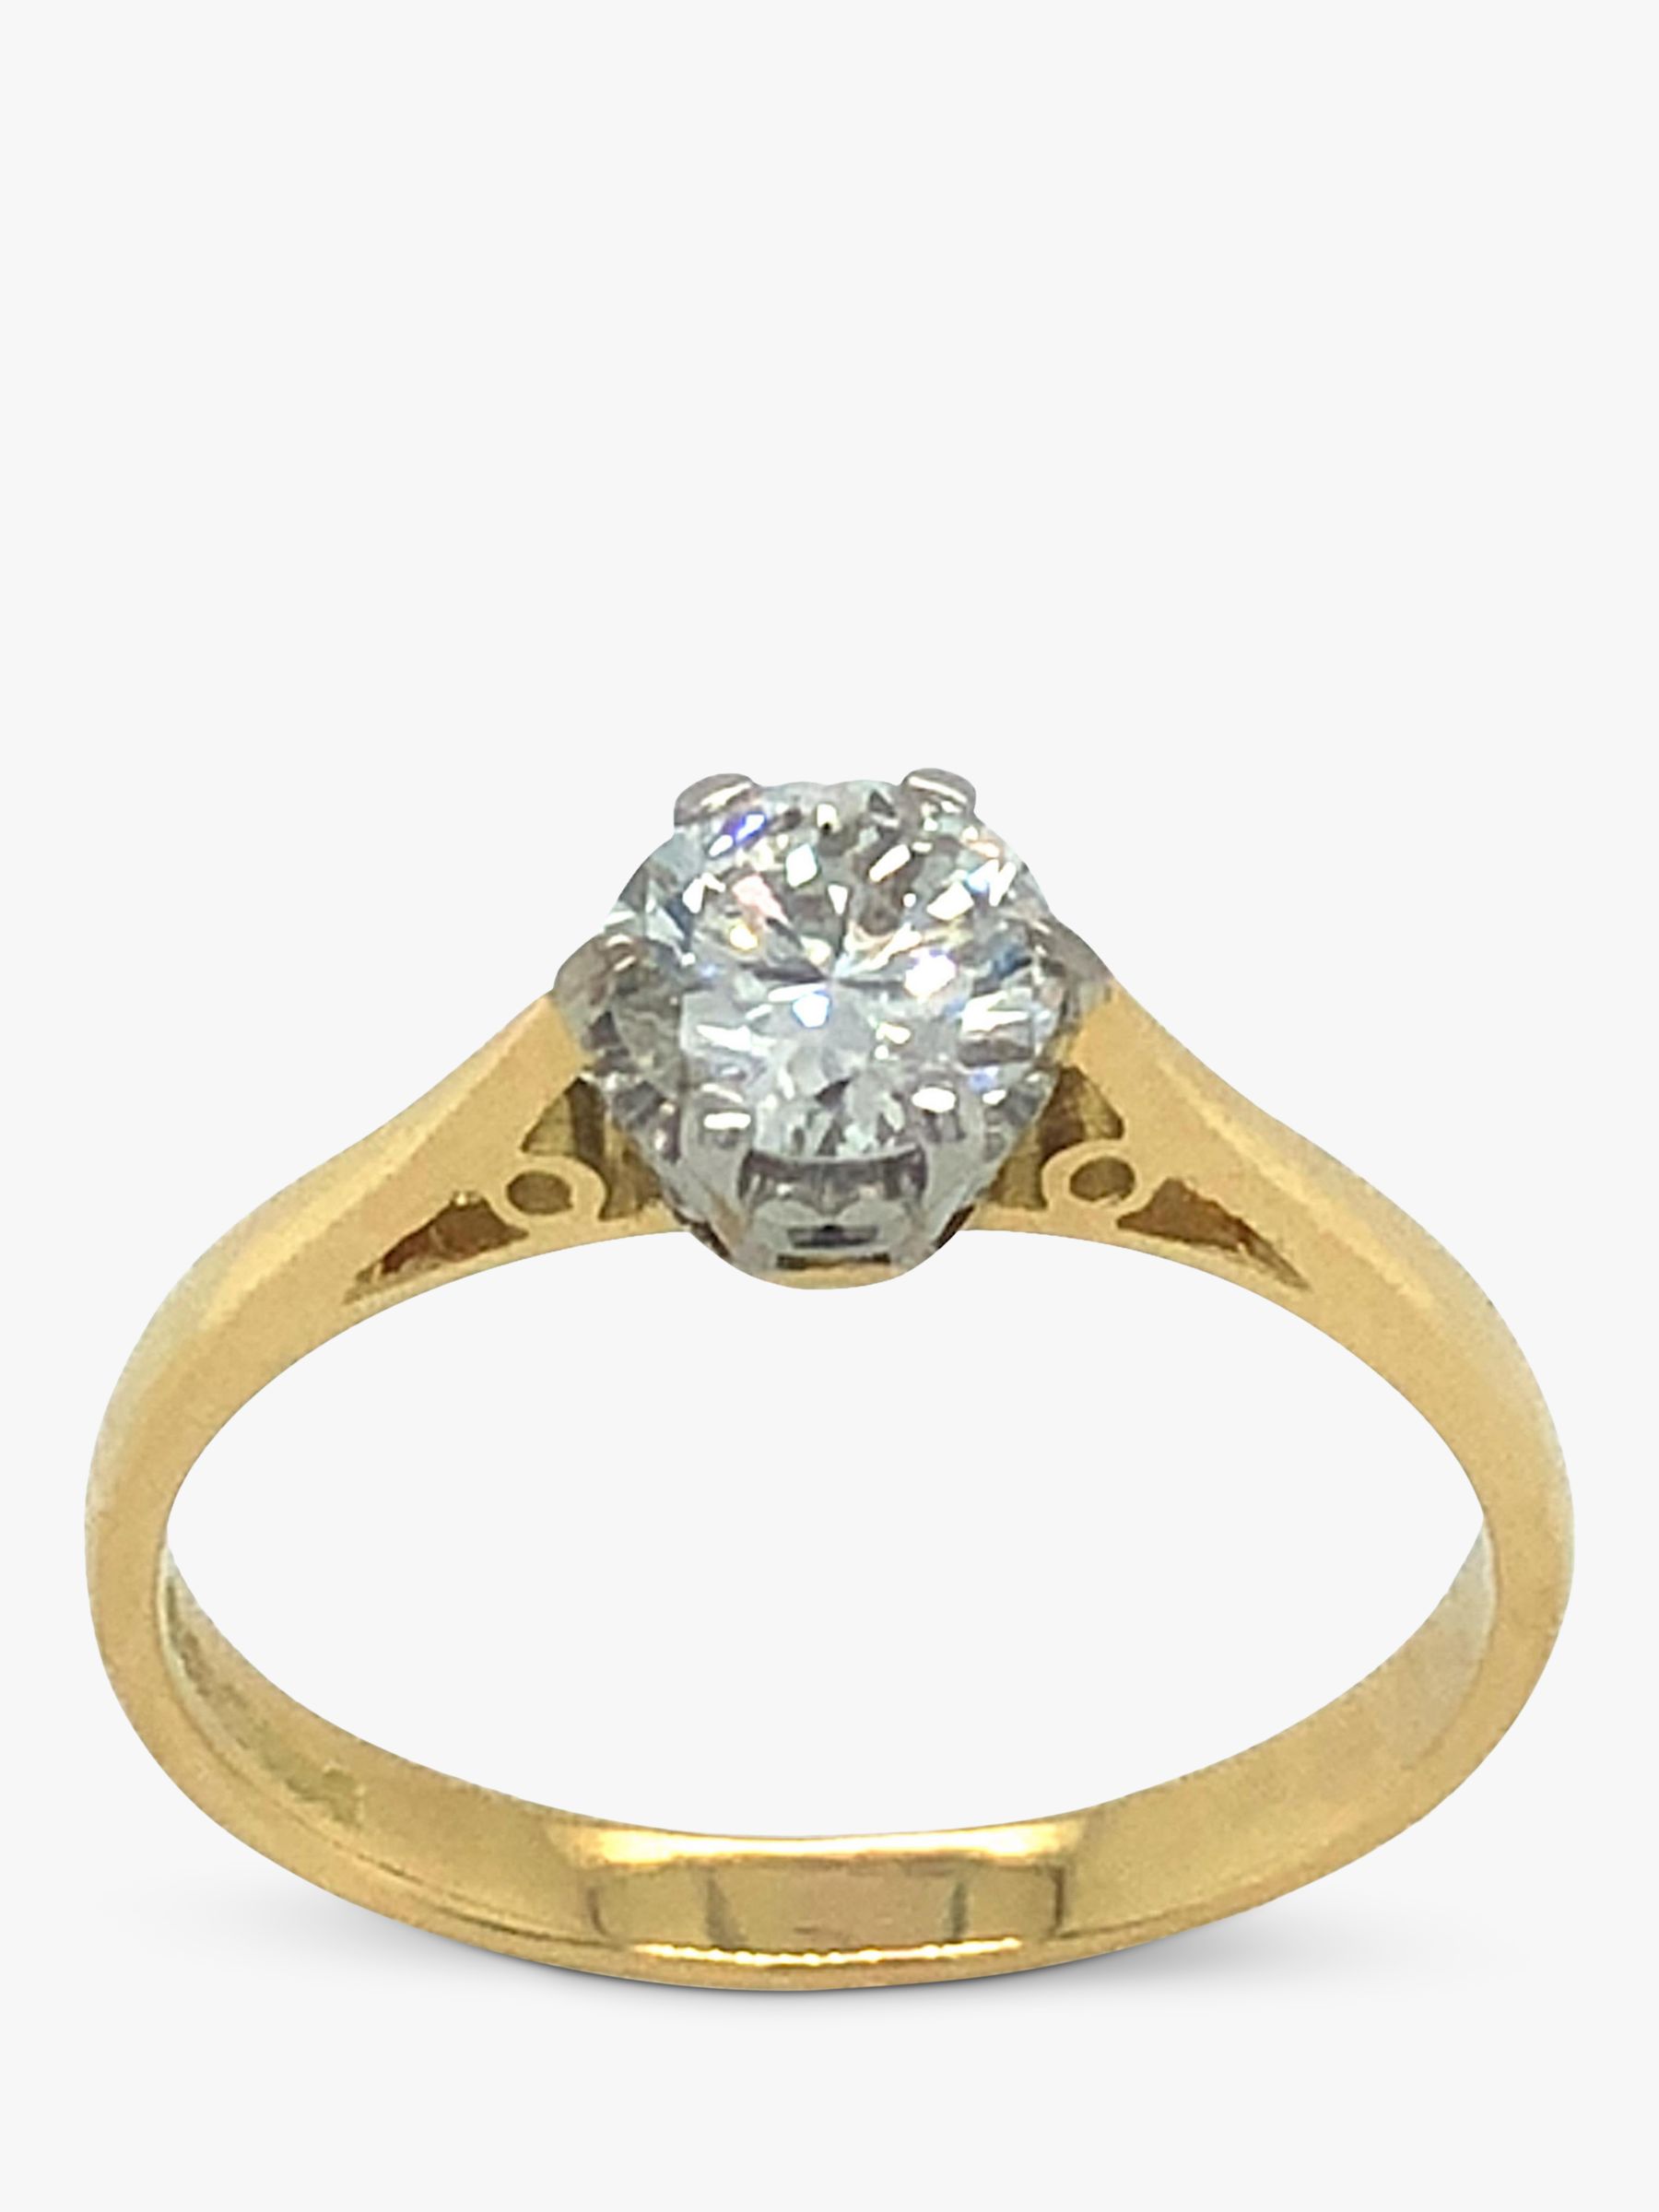 Vintage Fine Jewellery Second Hand 18ct Yellow & White Gold Solitaire Diamond Ring, Gold